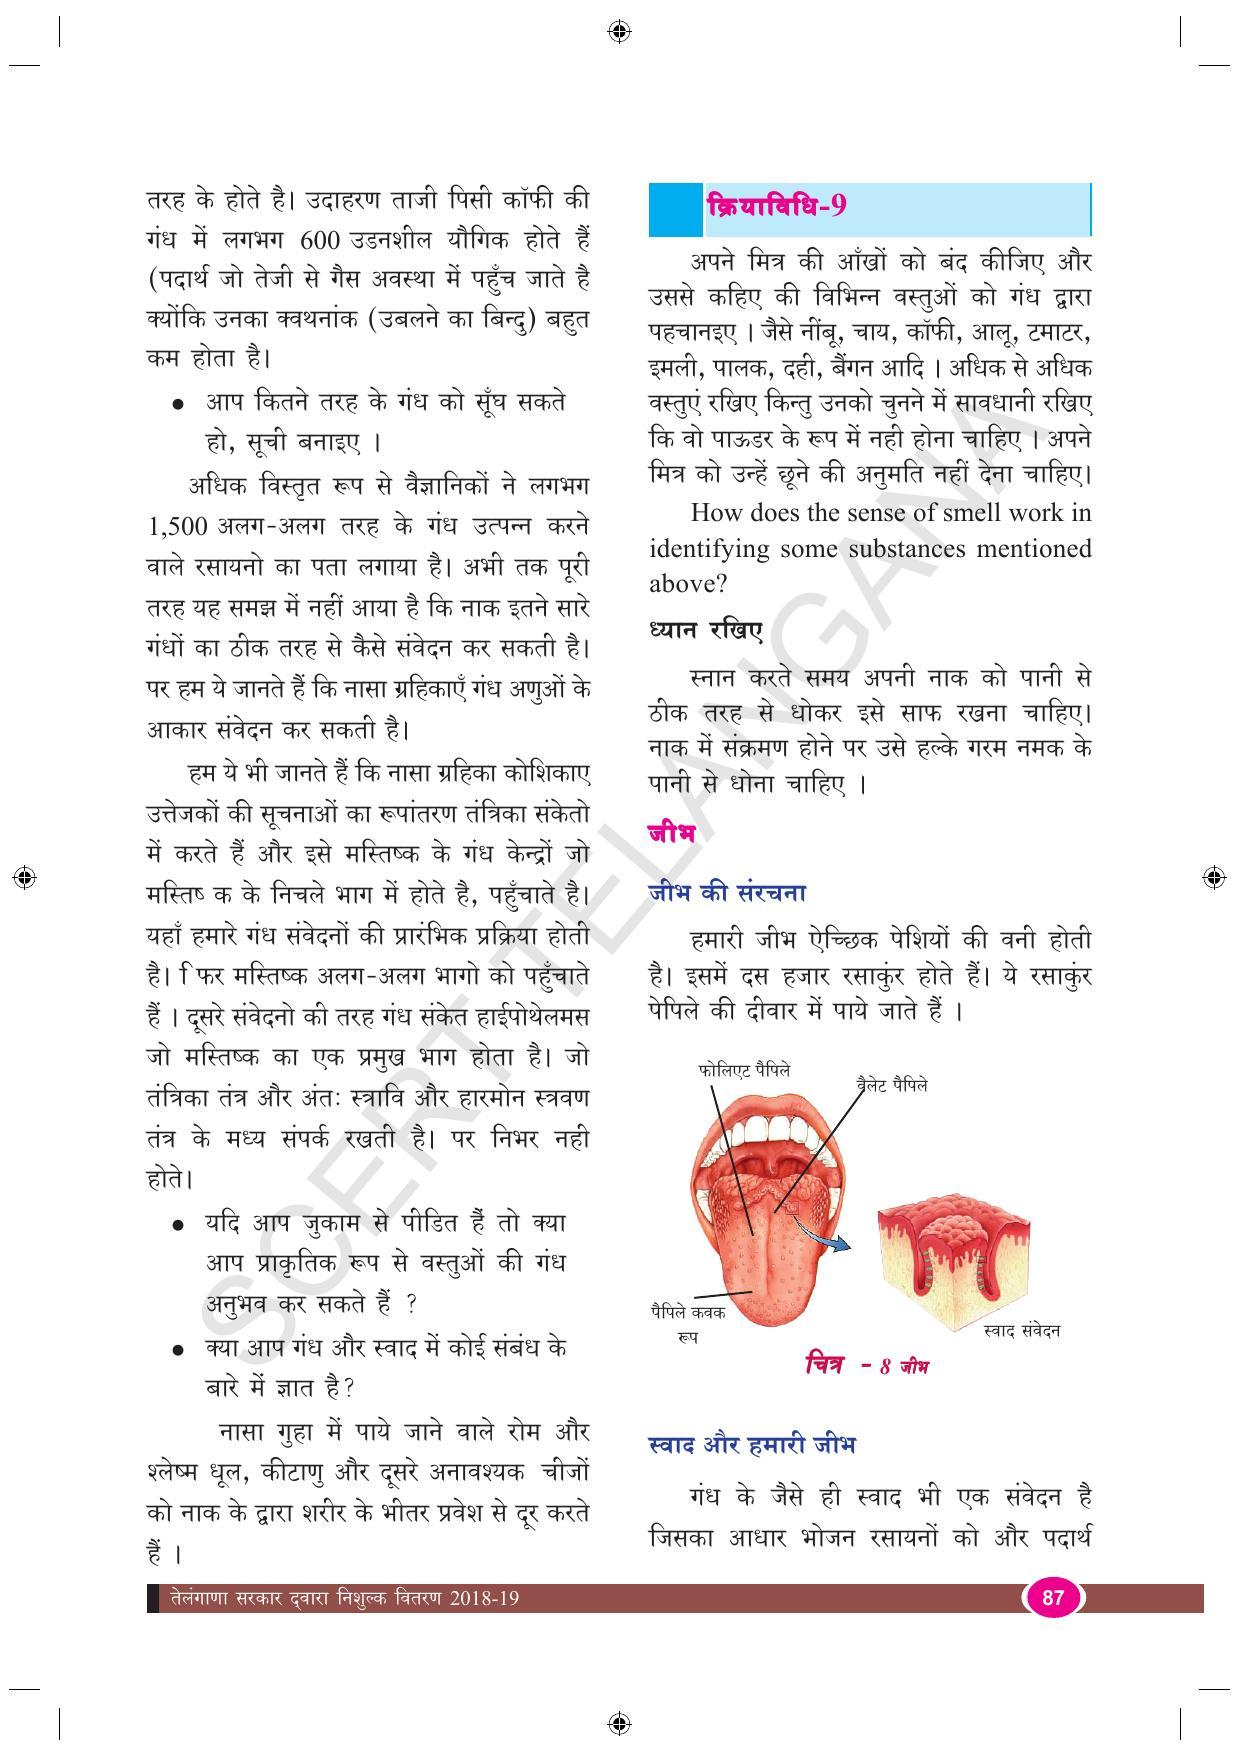 TS SCERT Class 9 Biological Science (Hindi Medium) Text Book - Page 99